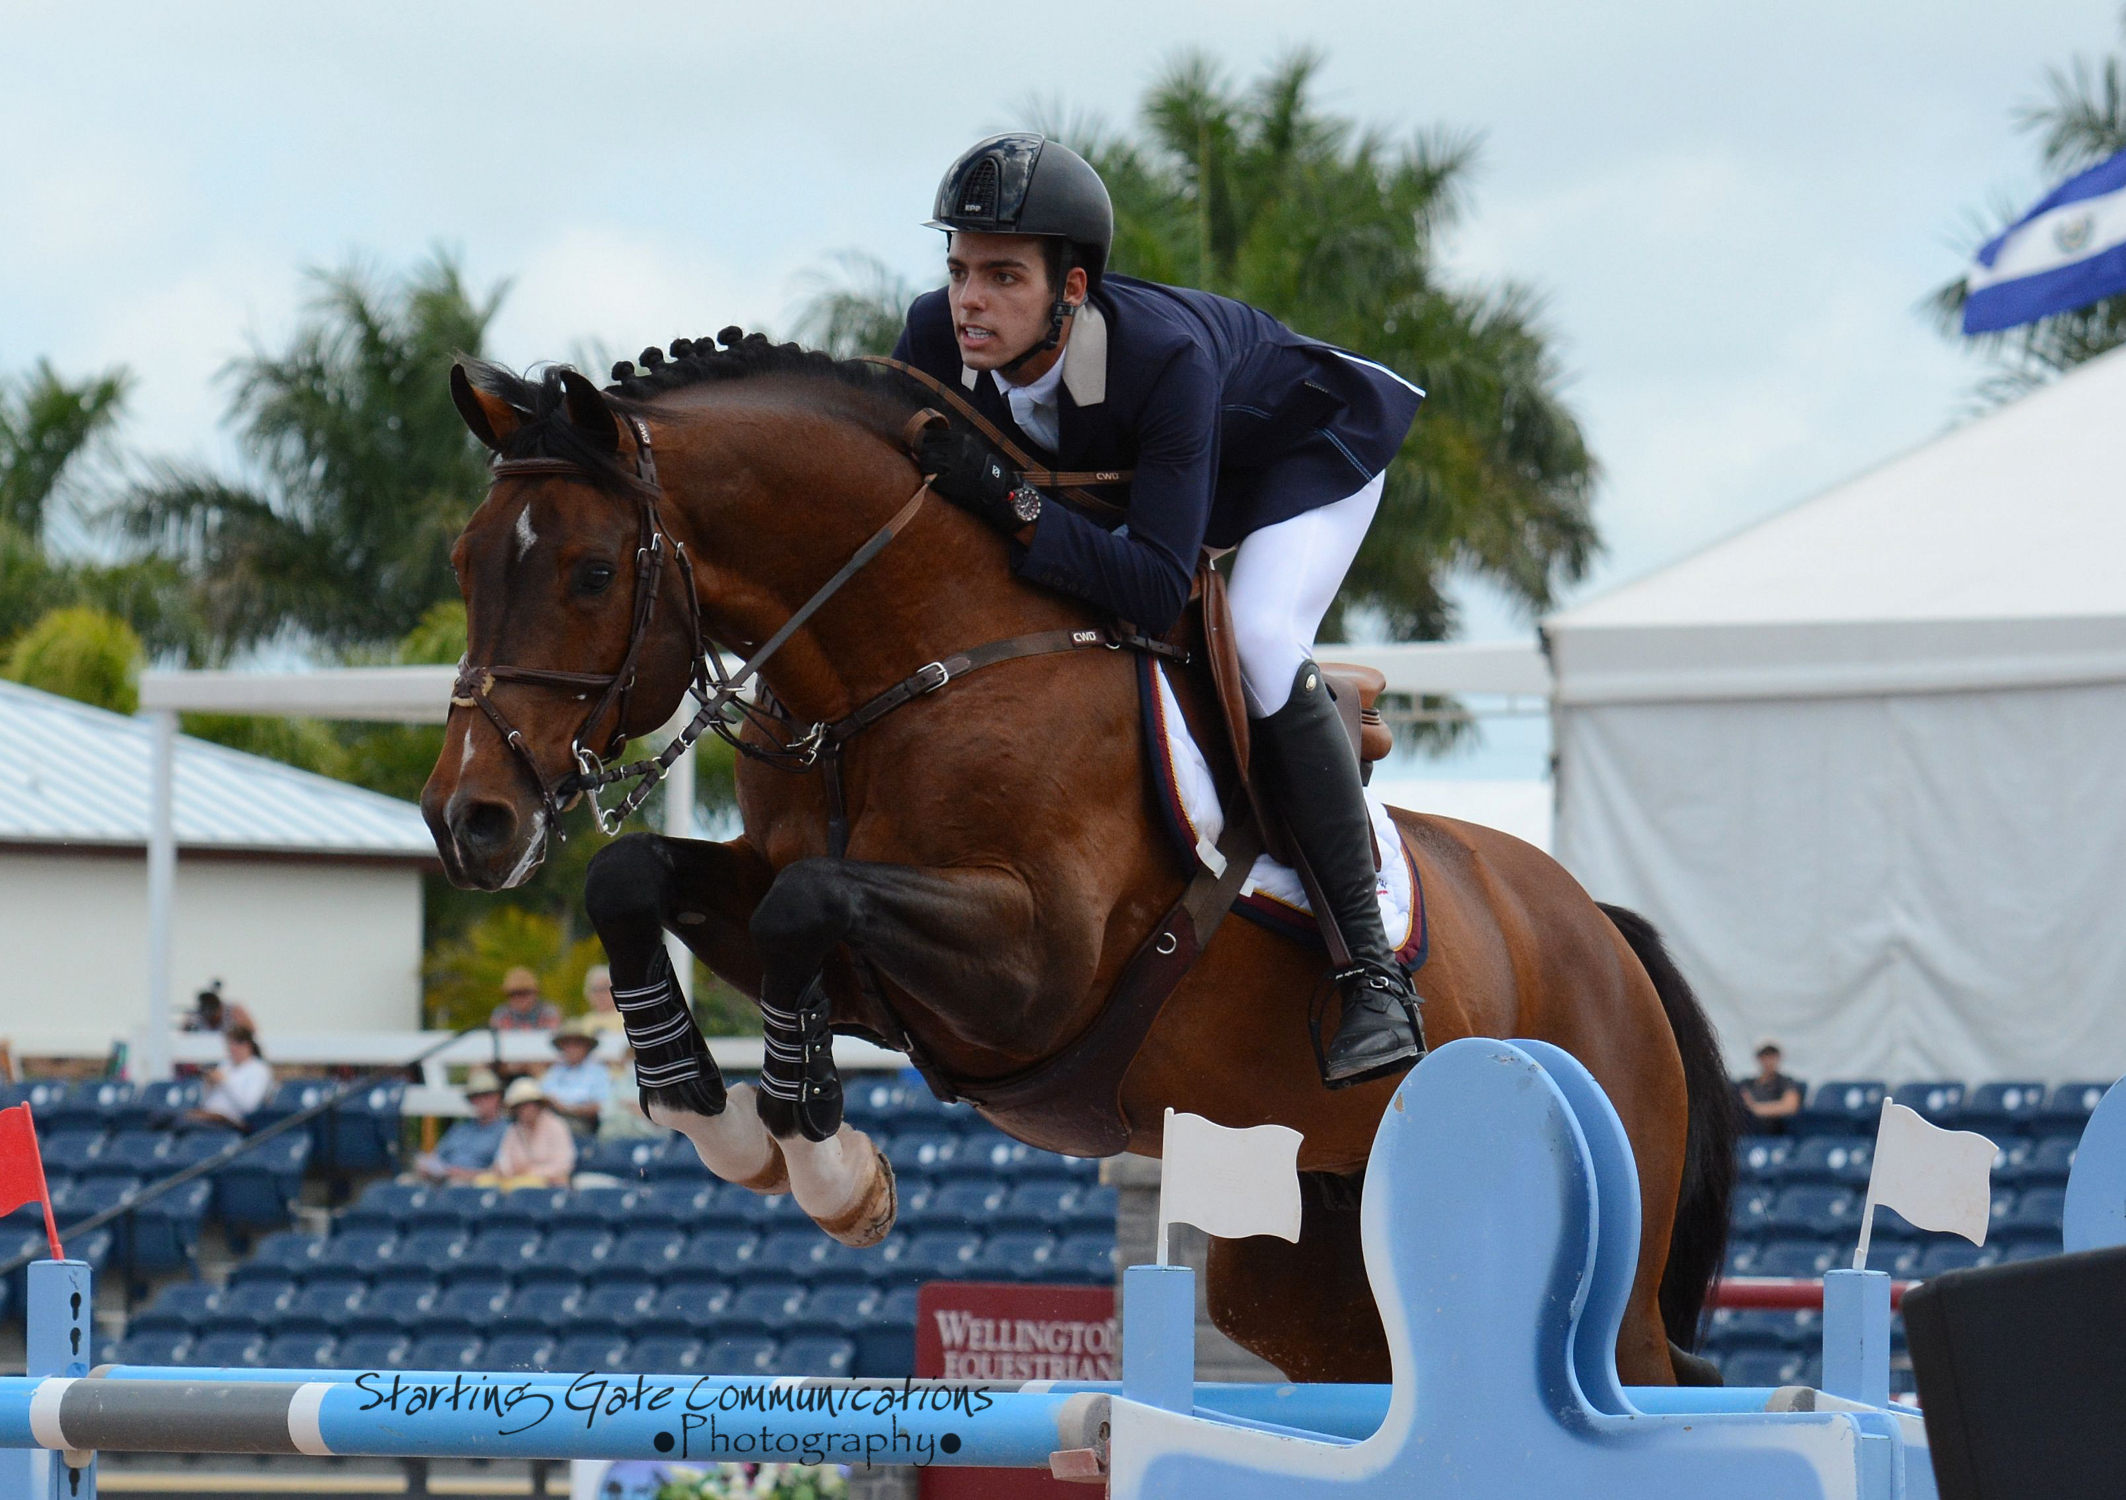 Emanuel Andrade Presented with Hermes Talented Young Rider Award